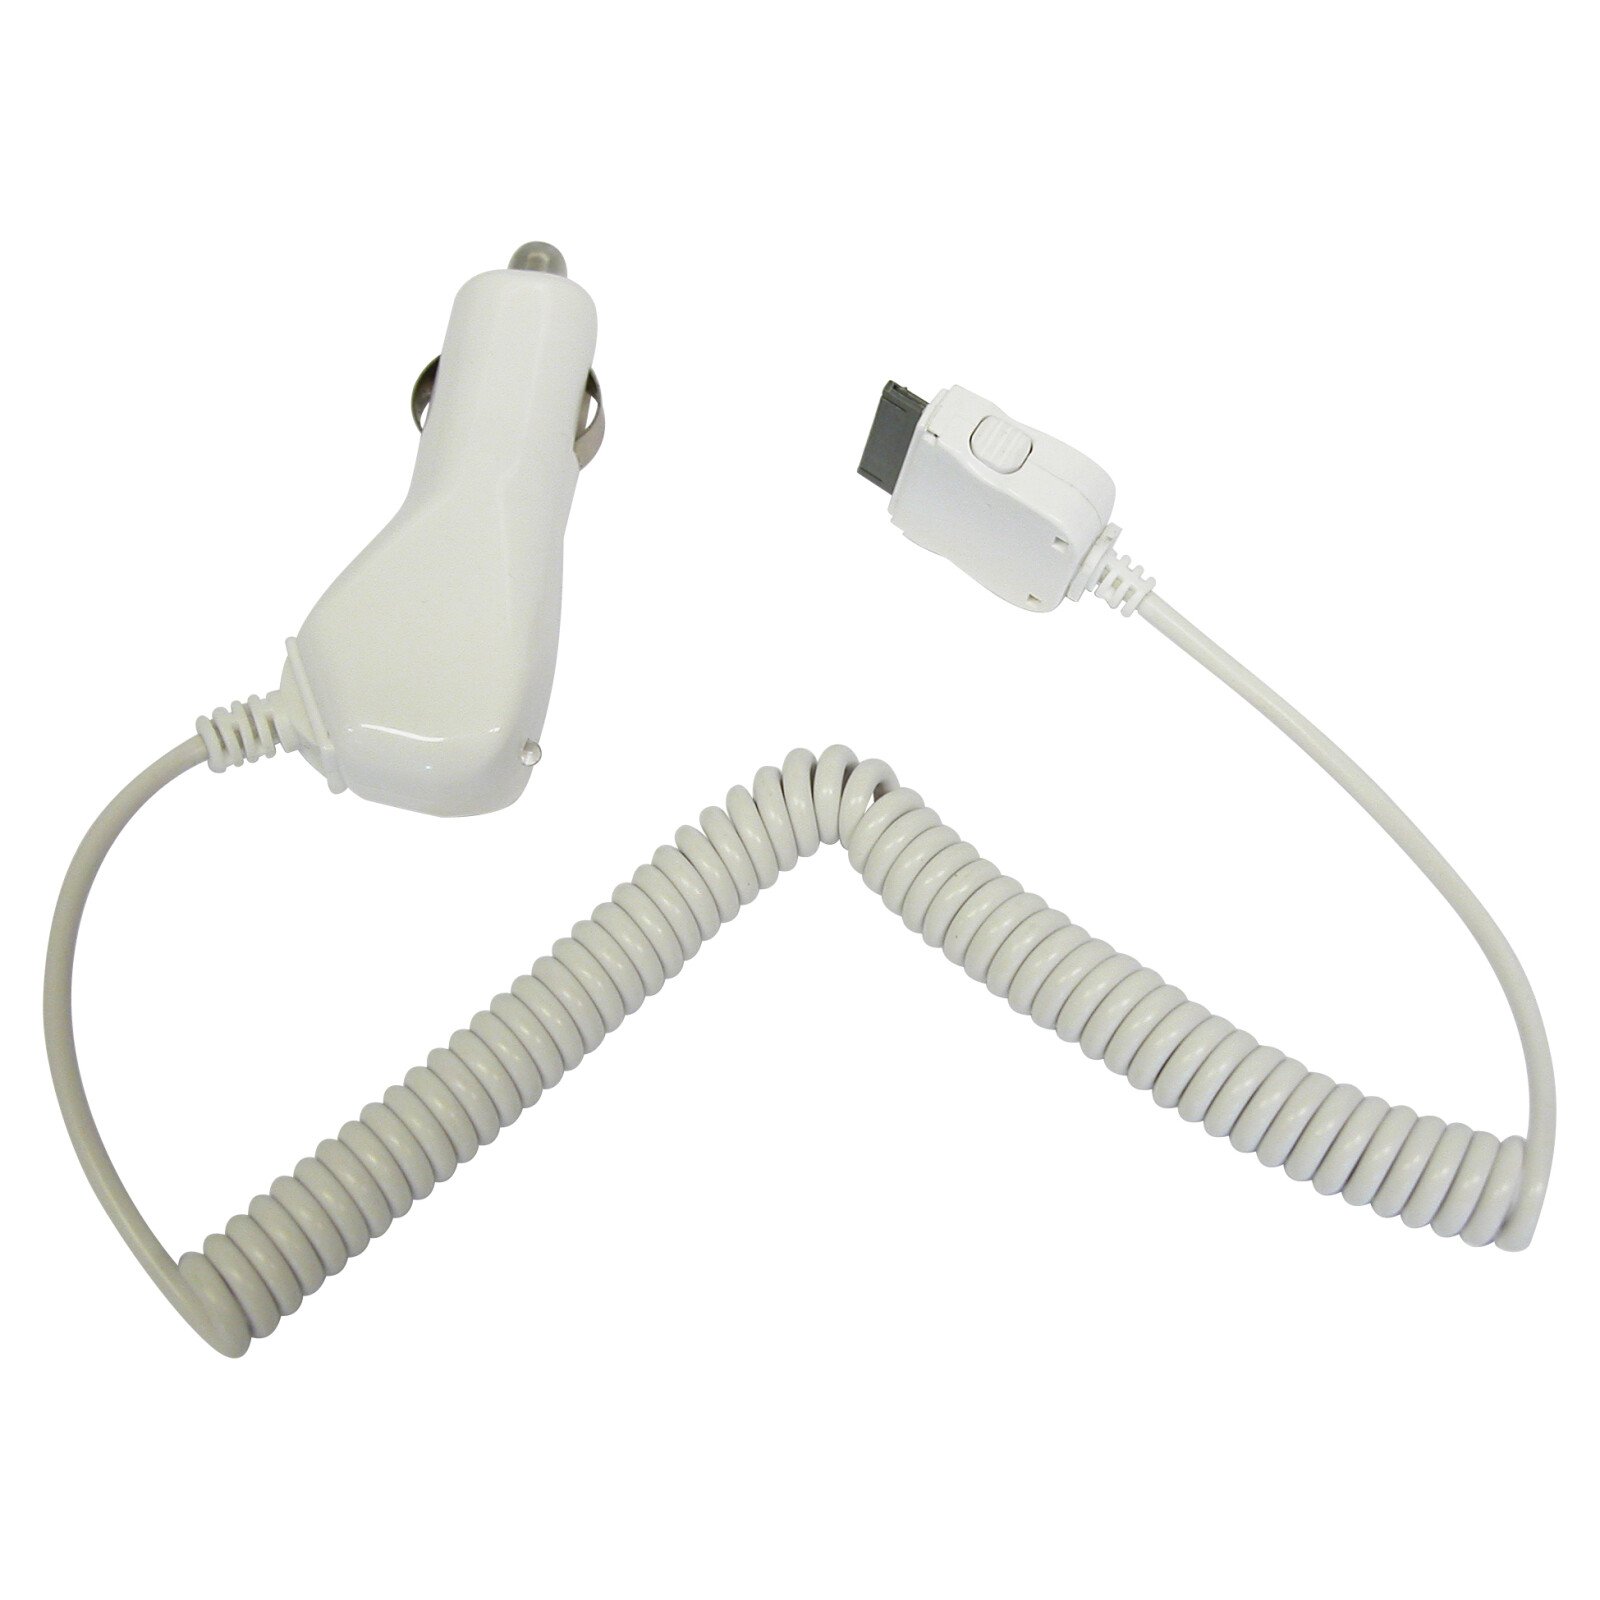 Carpoint charger for iPOD and iPhone 12-24V thumb